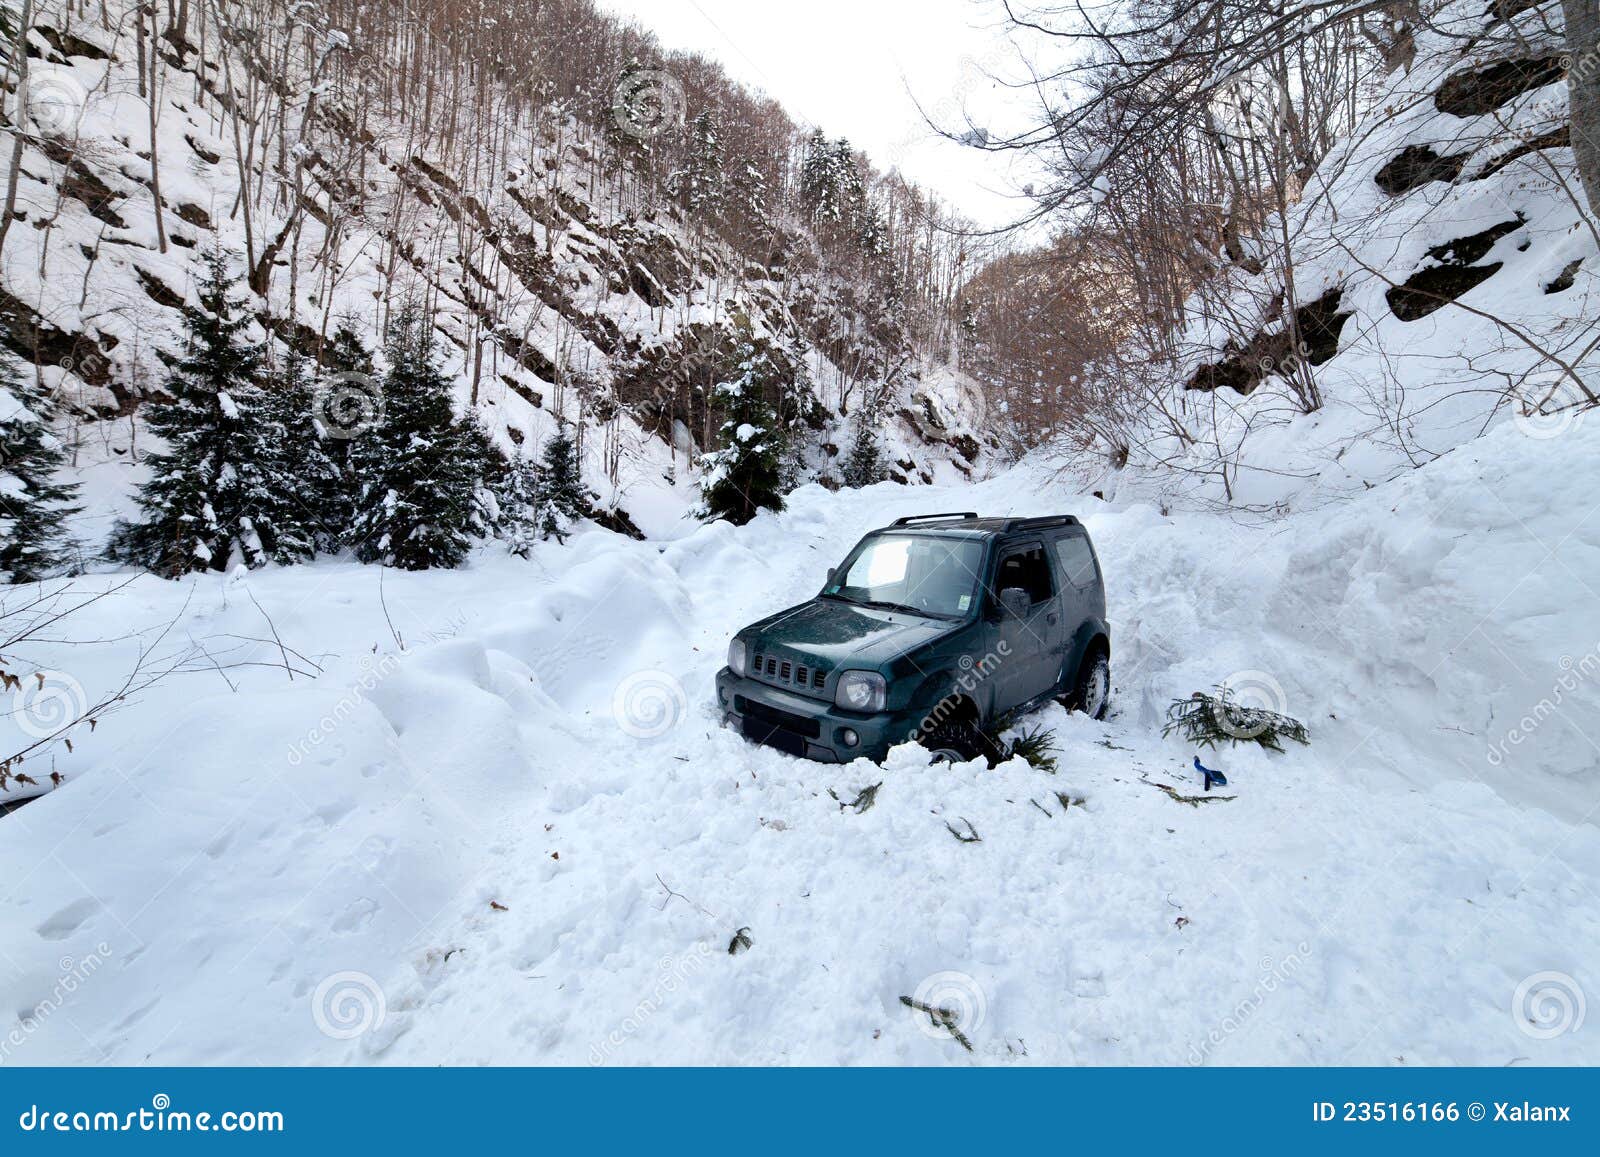 car stuck in a snow avalanche